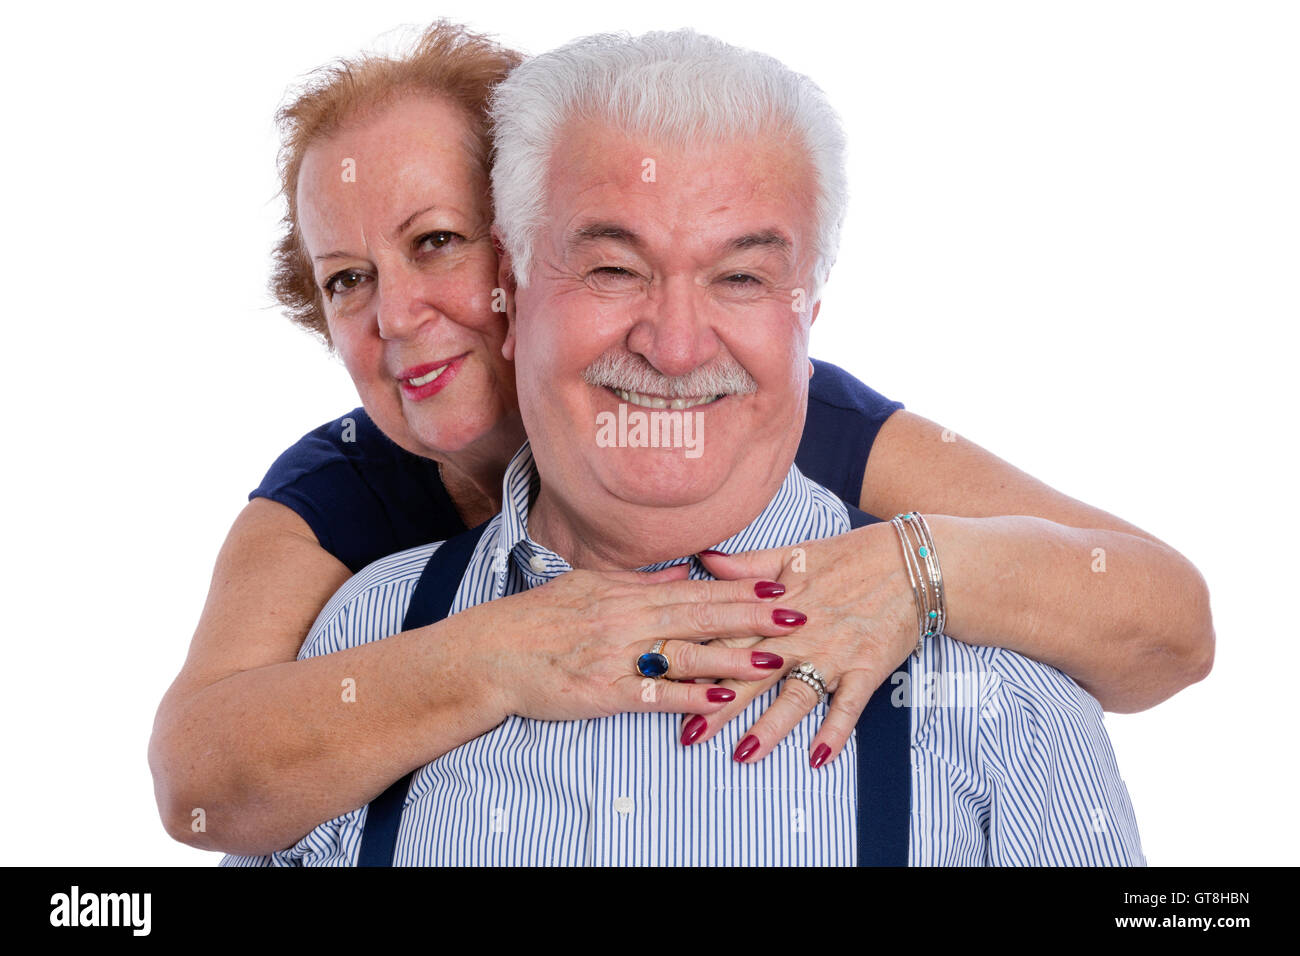 Smiling husband in pinstripe shirt with suspenders being hugged by happy wife from behind over white background Stock Photo